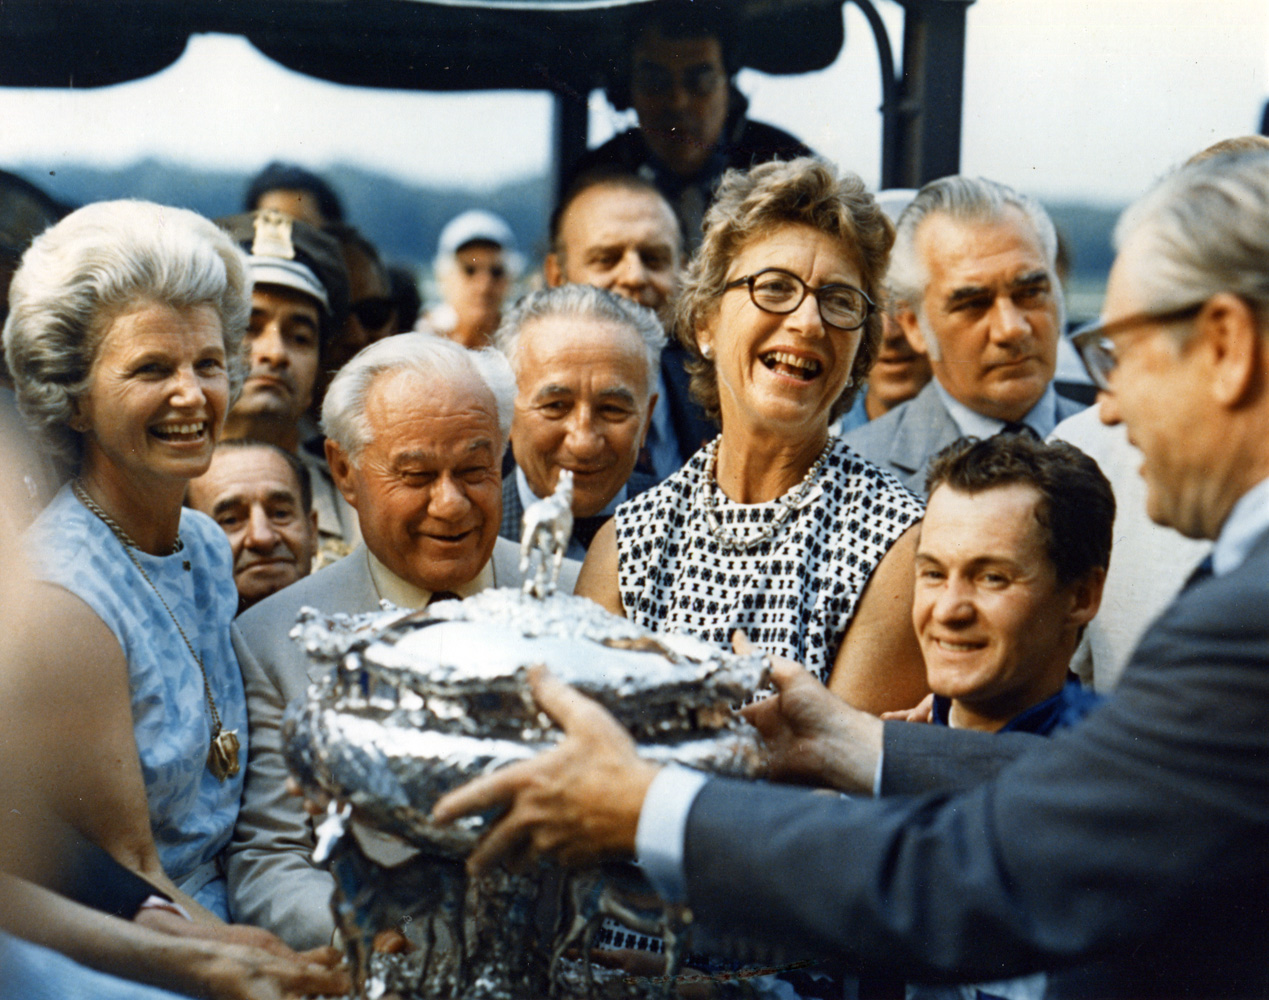 The winning connections of Secretariat receiving the August Belmont Memorial Trophy from New York Governor Nelson Rockefeller after winning the 1973 Belmont Stakes and Triple Crown (Museum Collection)